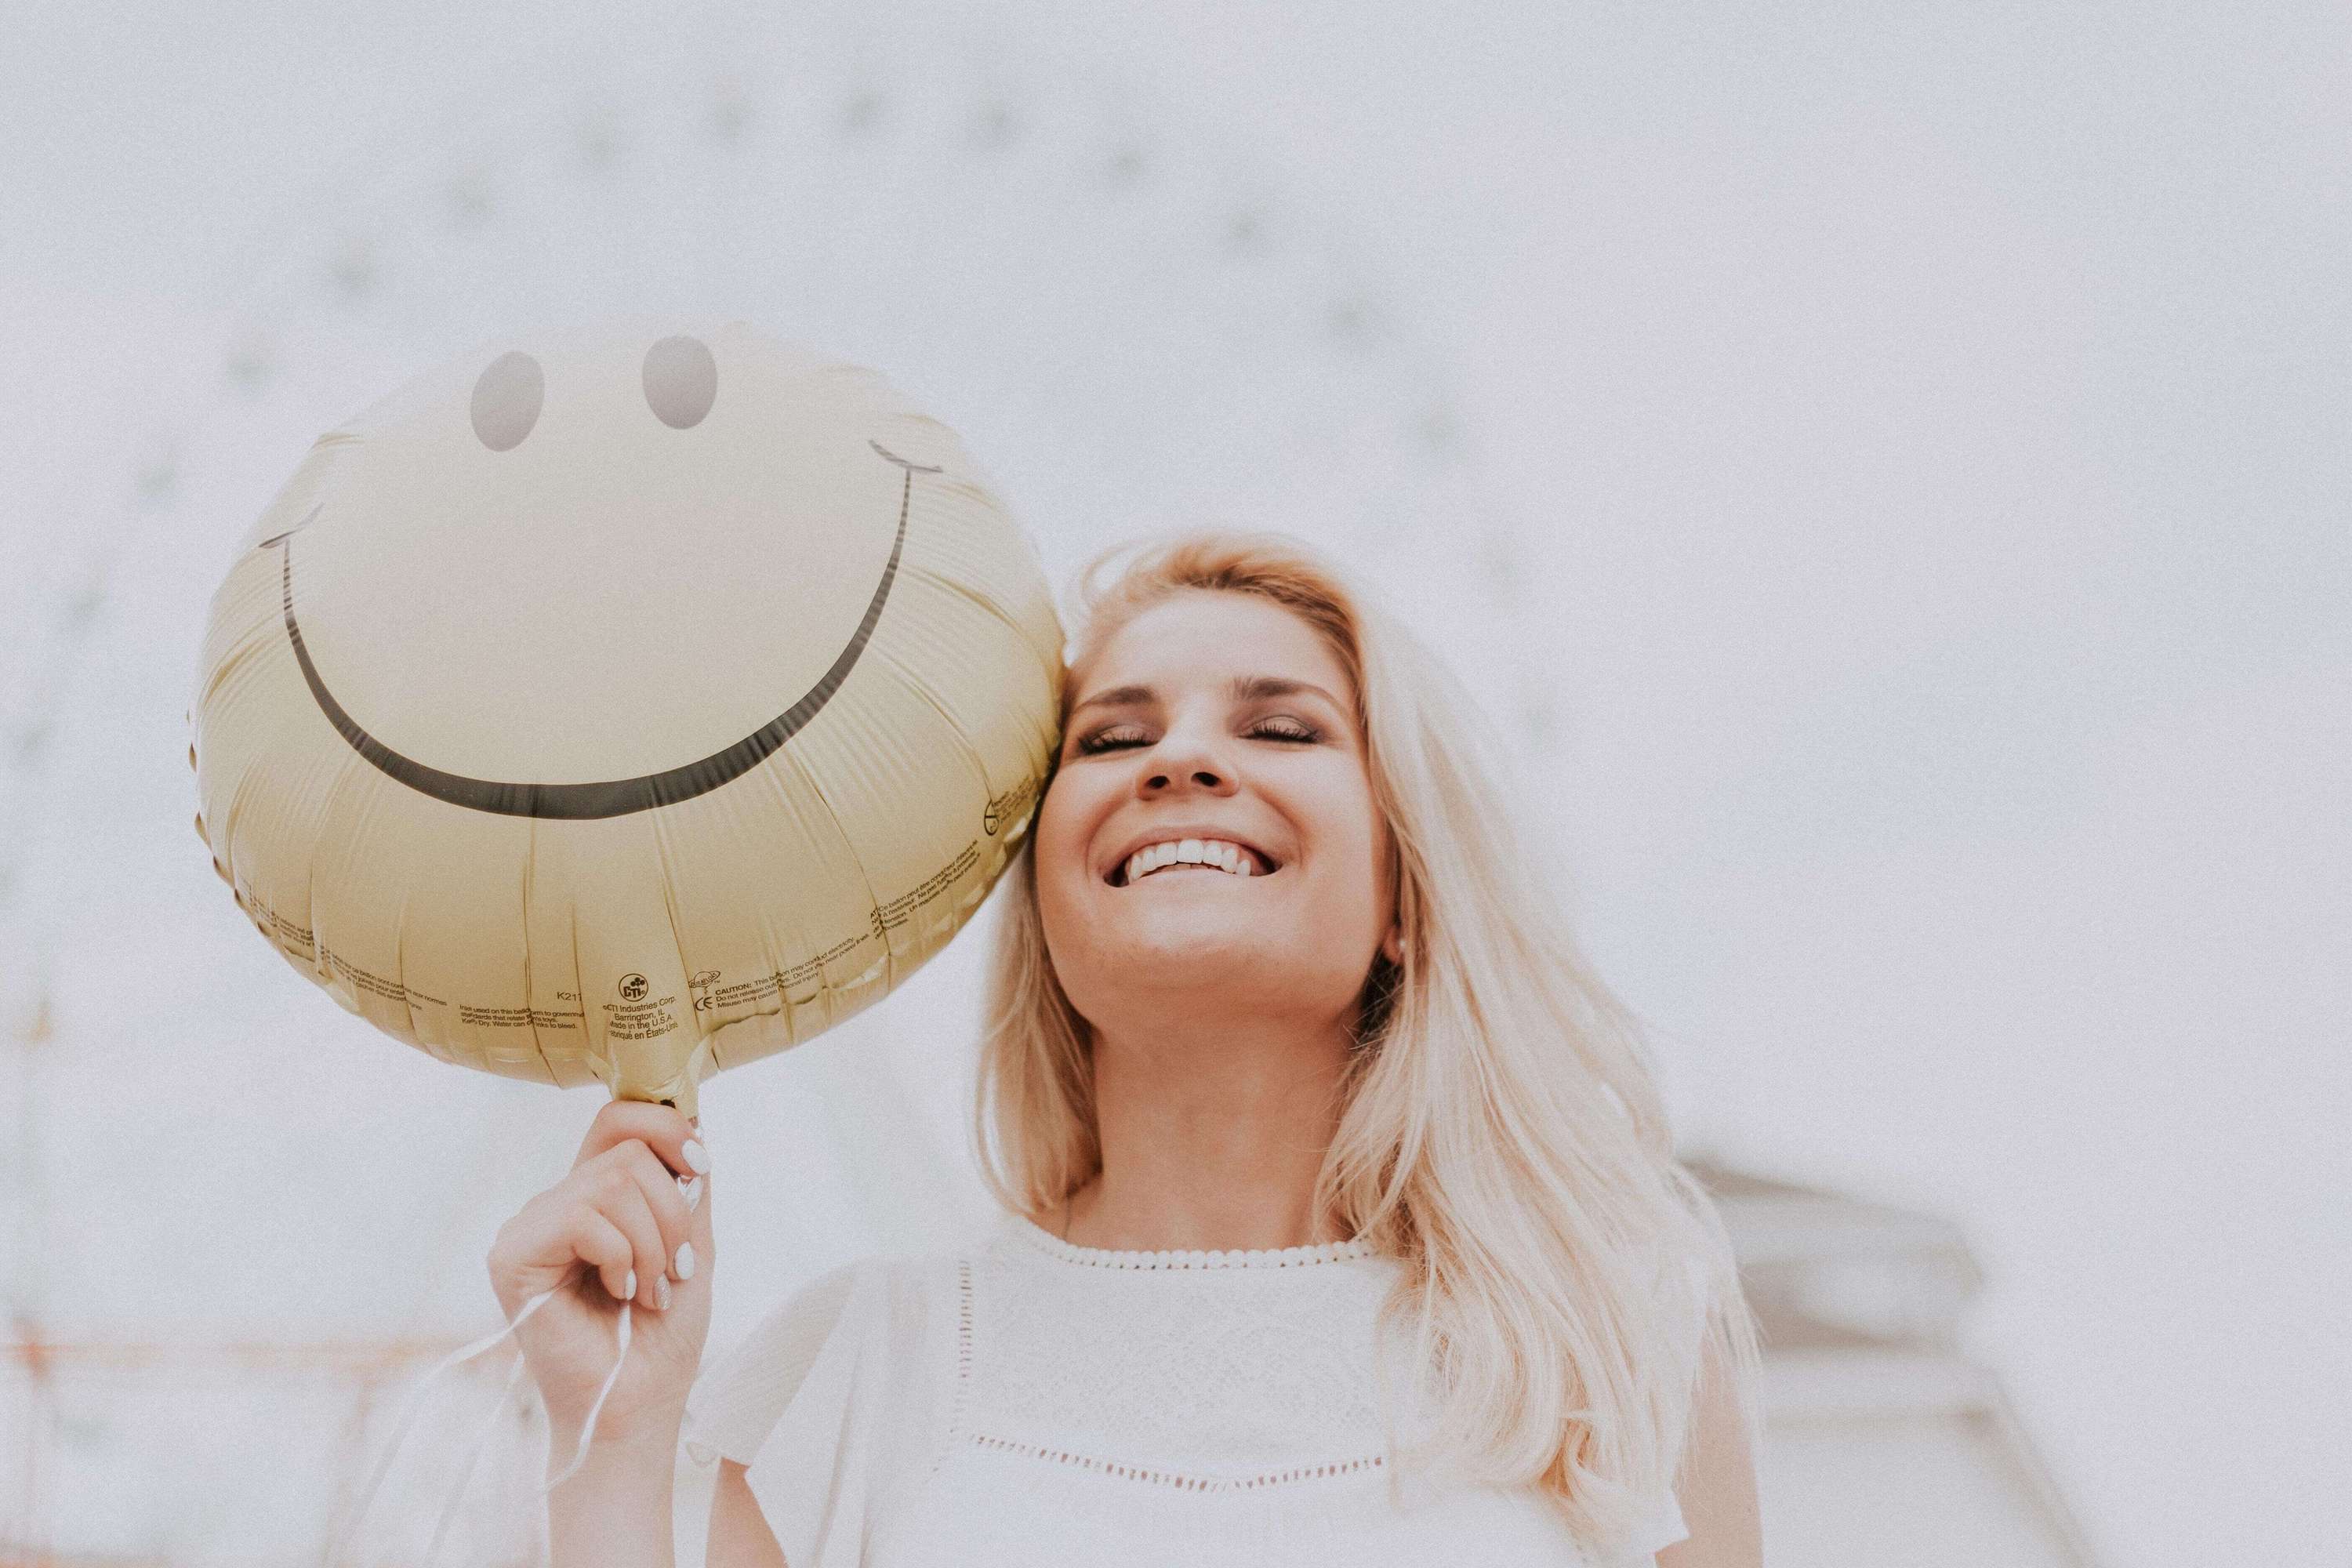 Study of the Top 10 Happiest Countries Reveals the Important Connection Between Happiness and Health